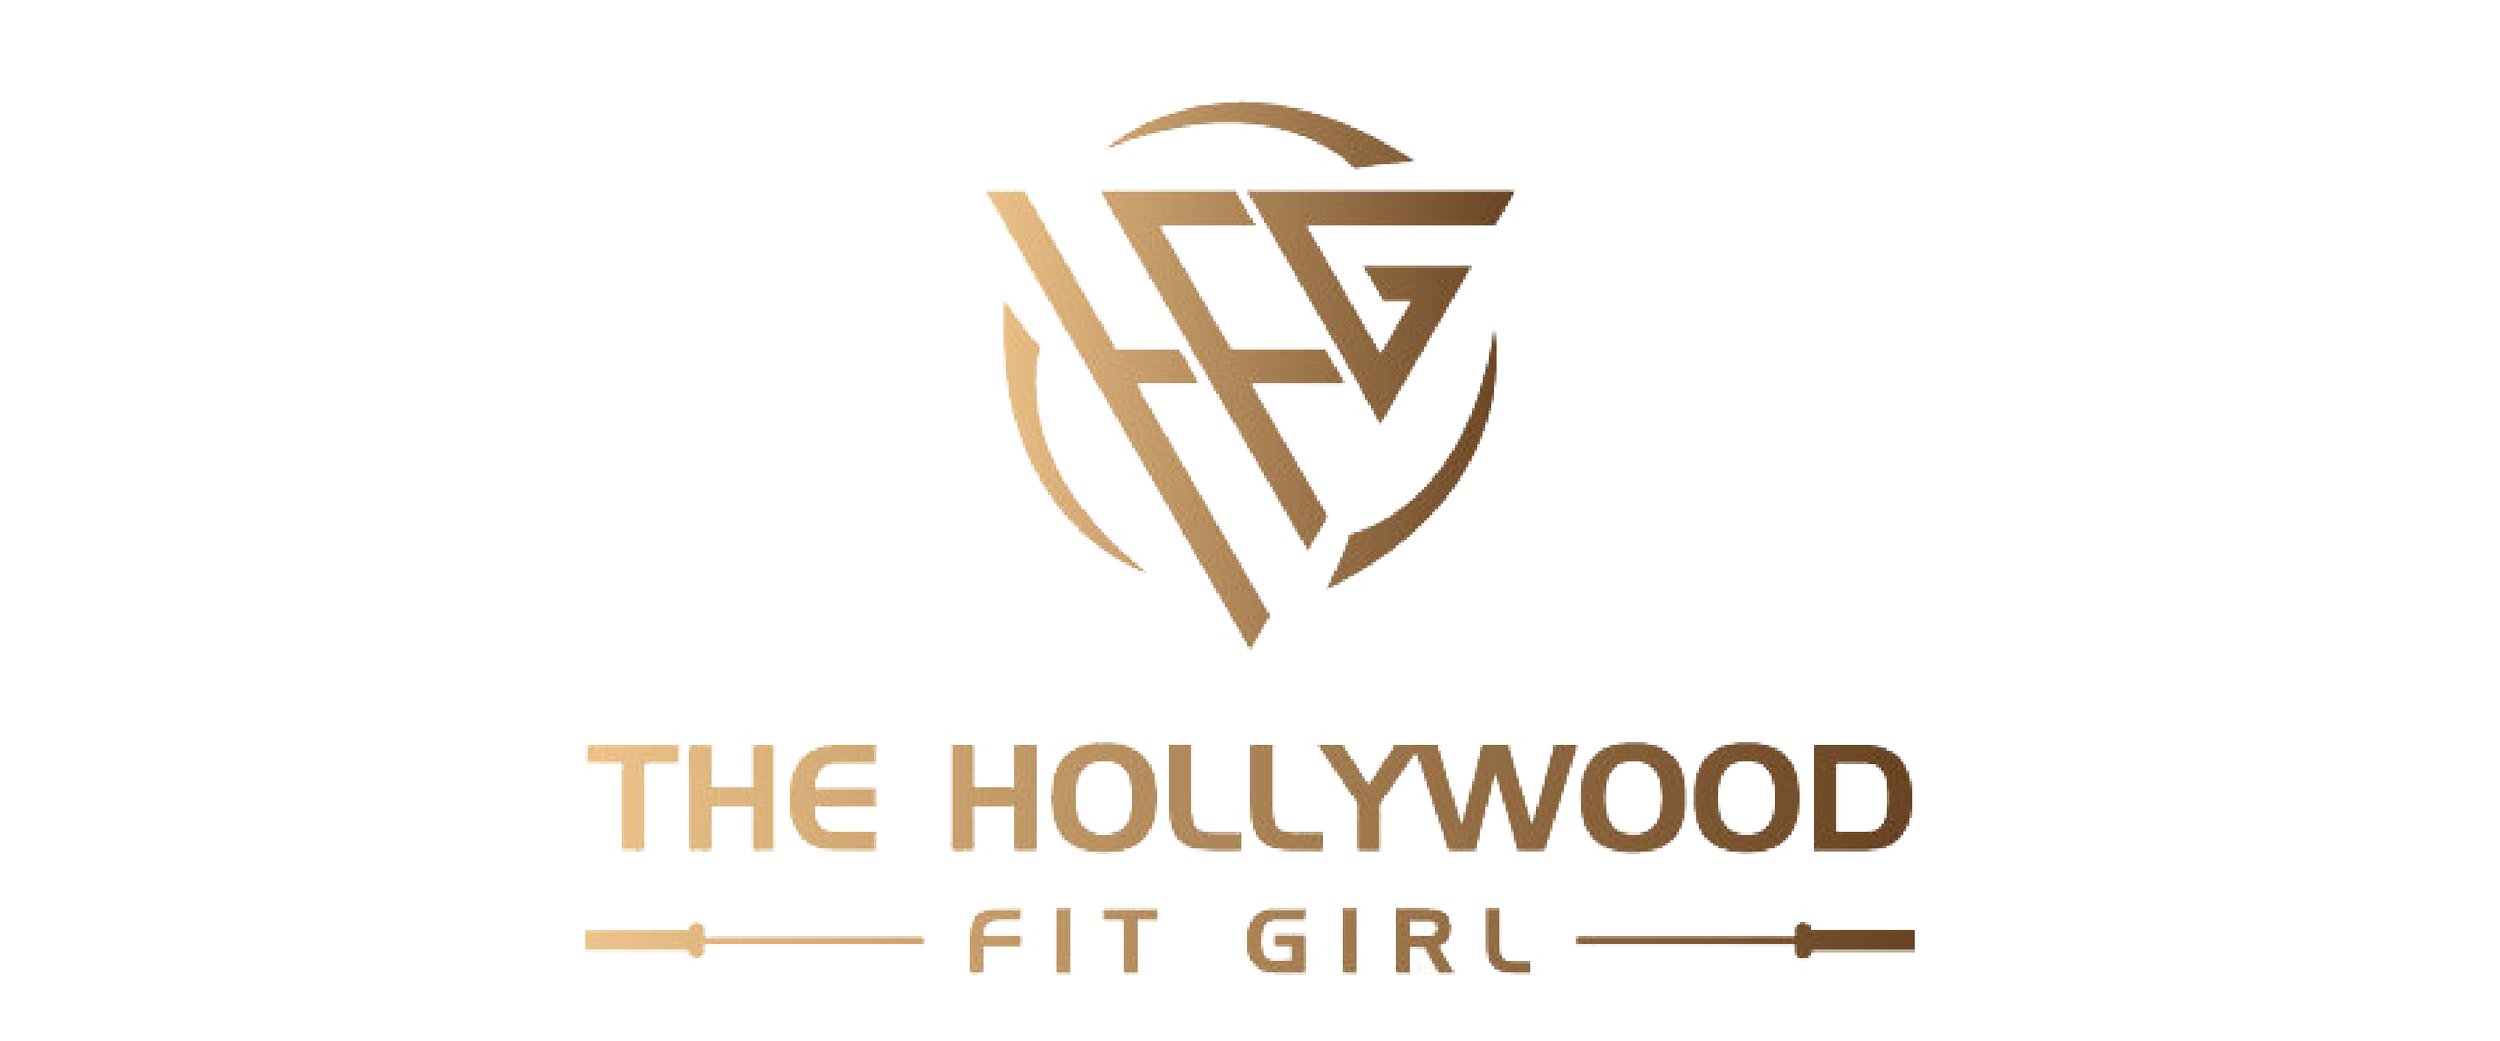 YumariDigital-Clients_TheHollywoodFitGirl.png